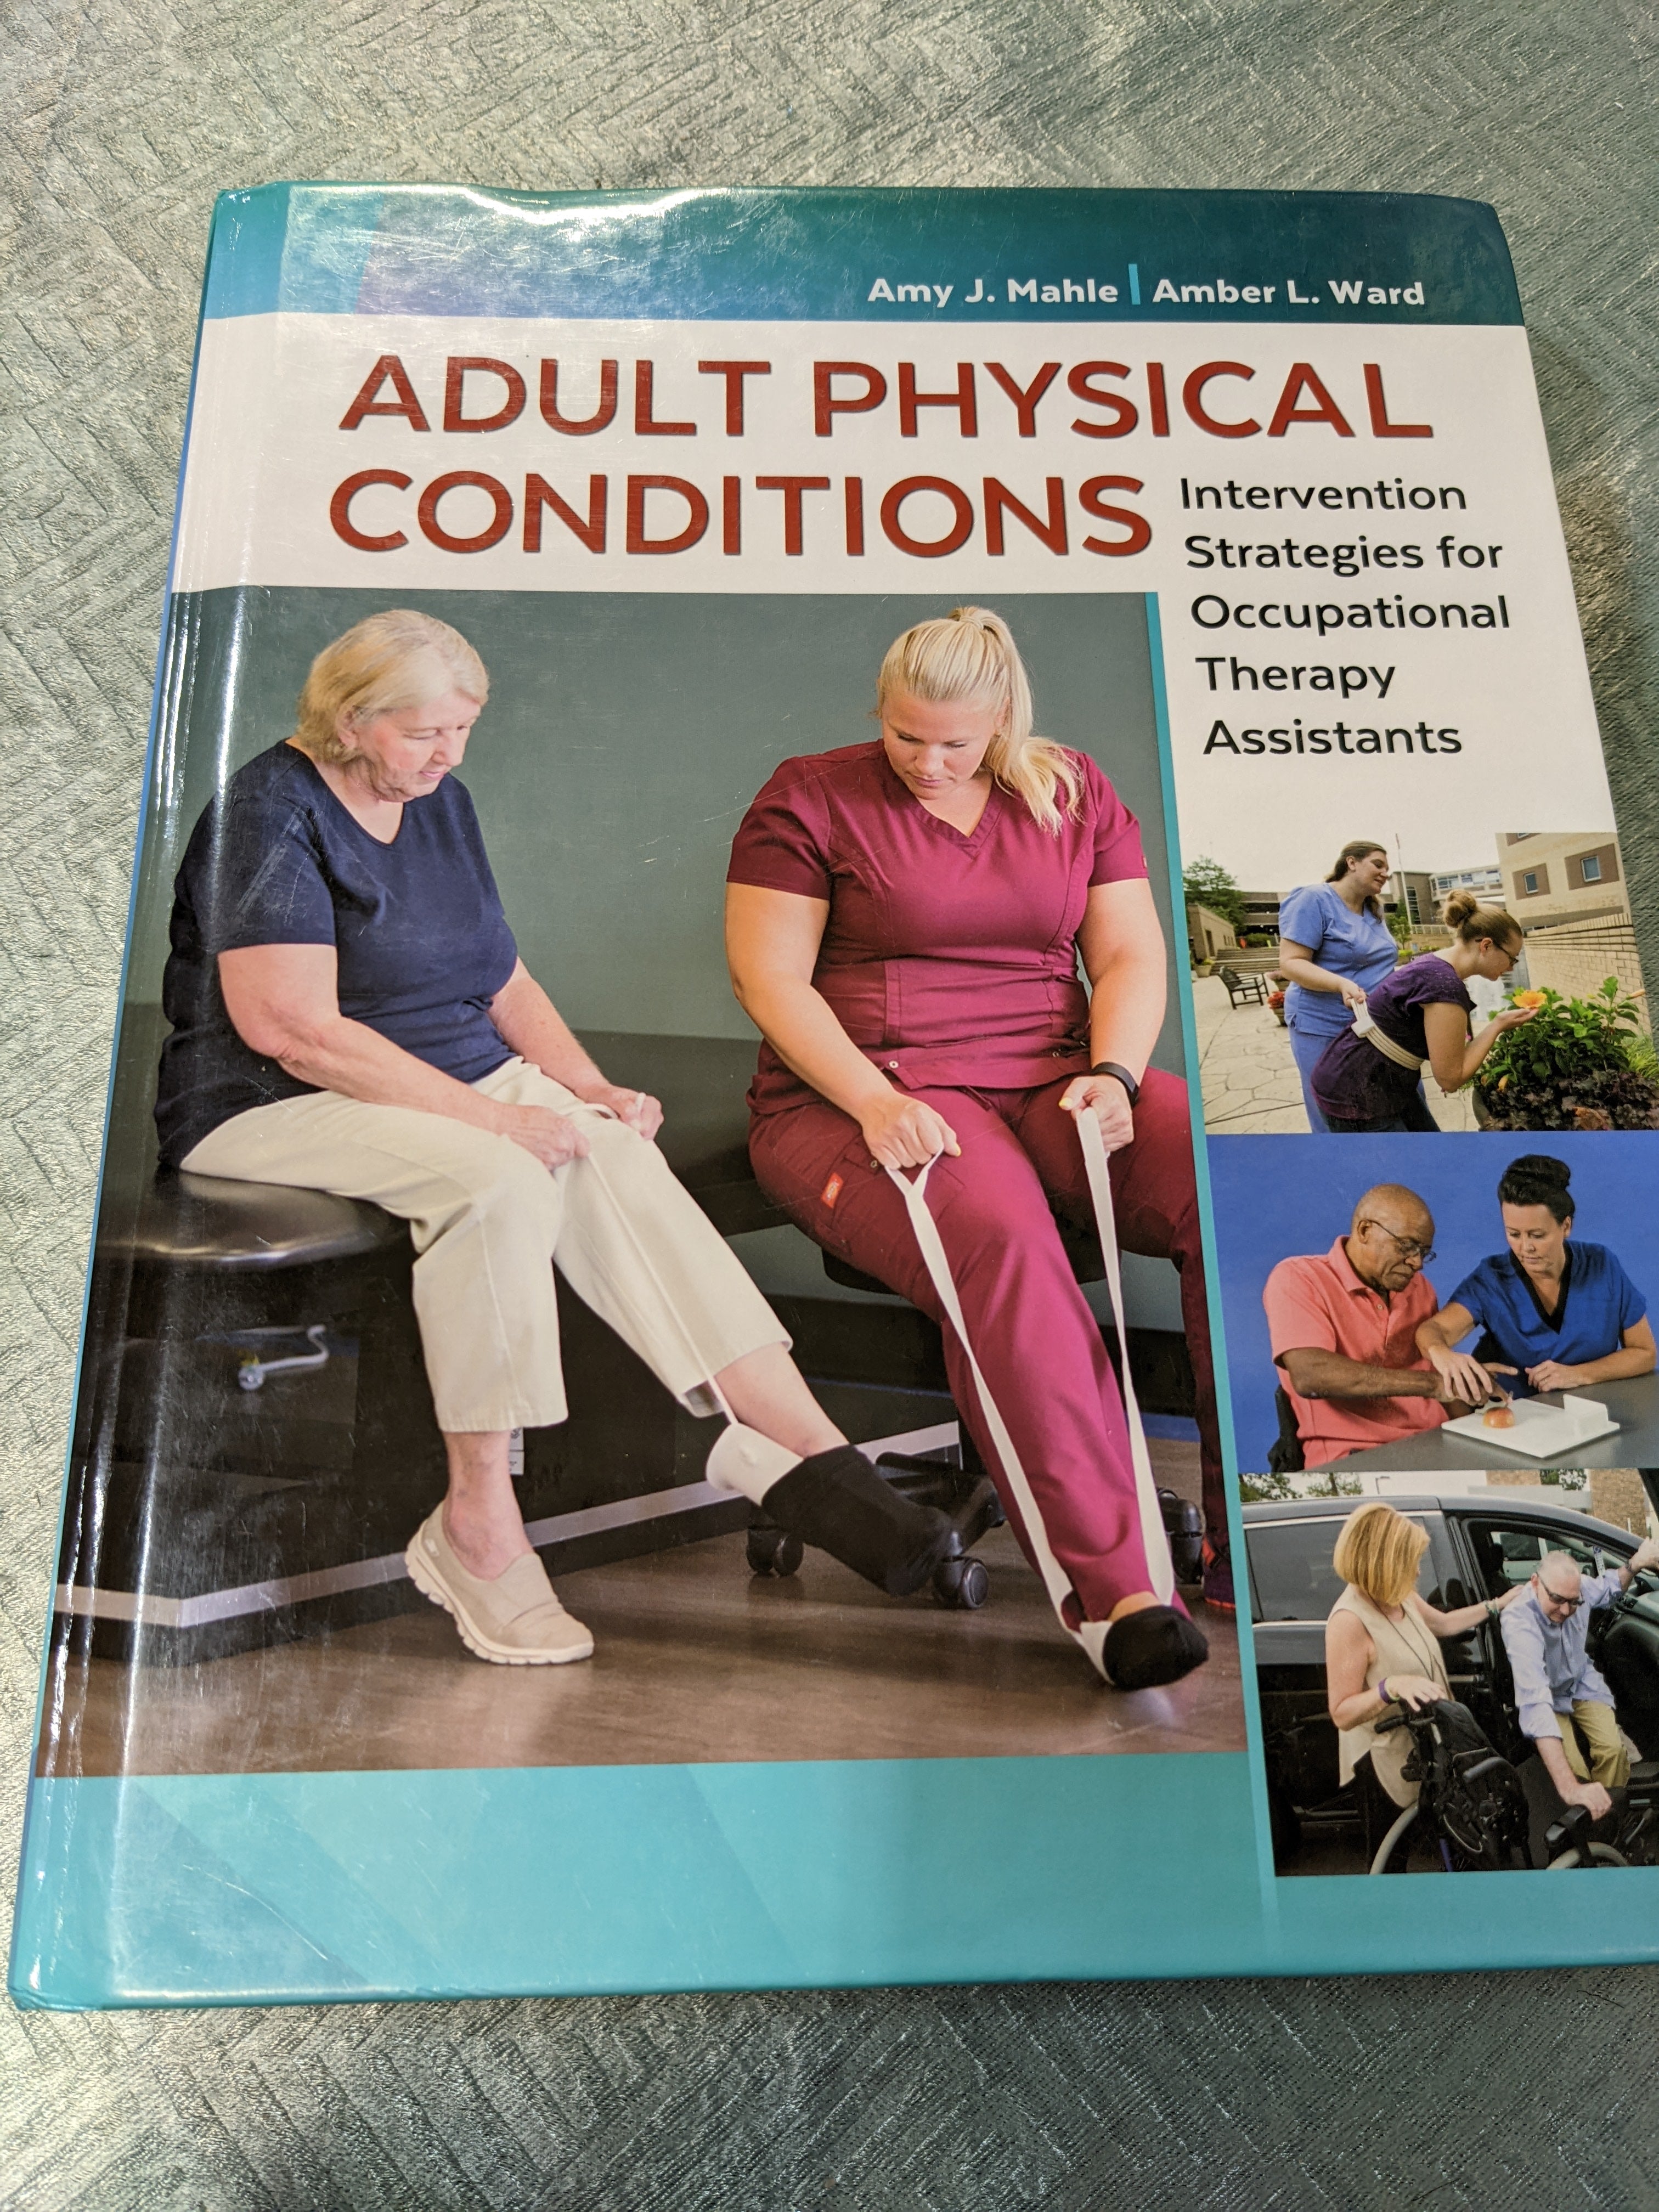 Adult Physical Conditions: Intervention Strategies for Occupational Therapy Assistants (7579853717742)